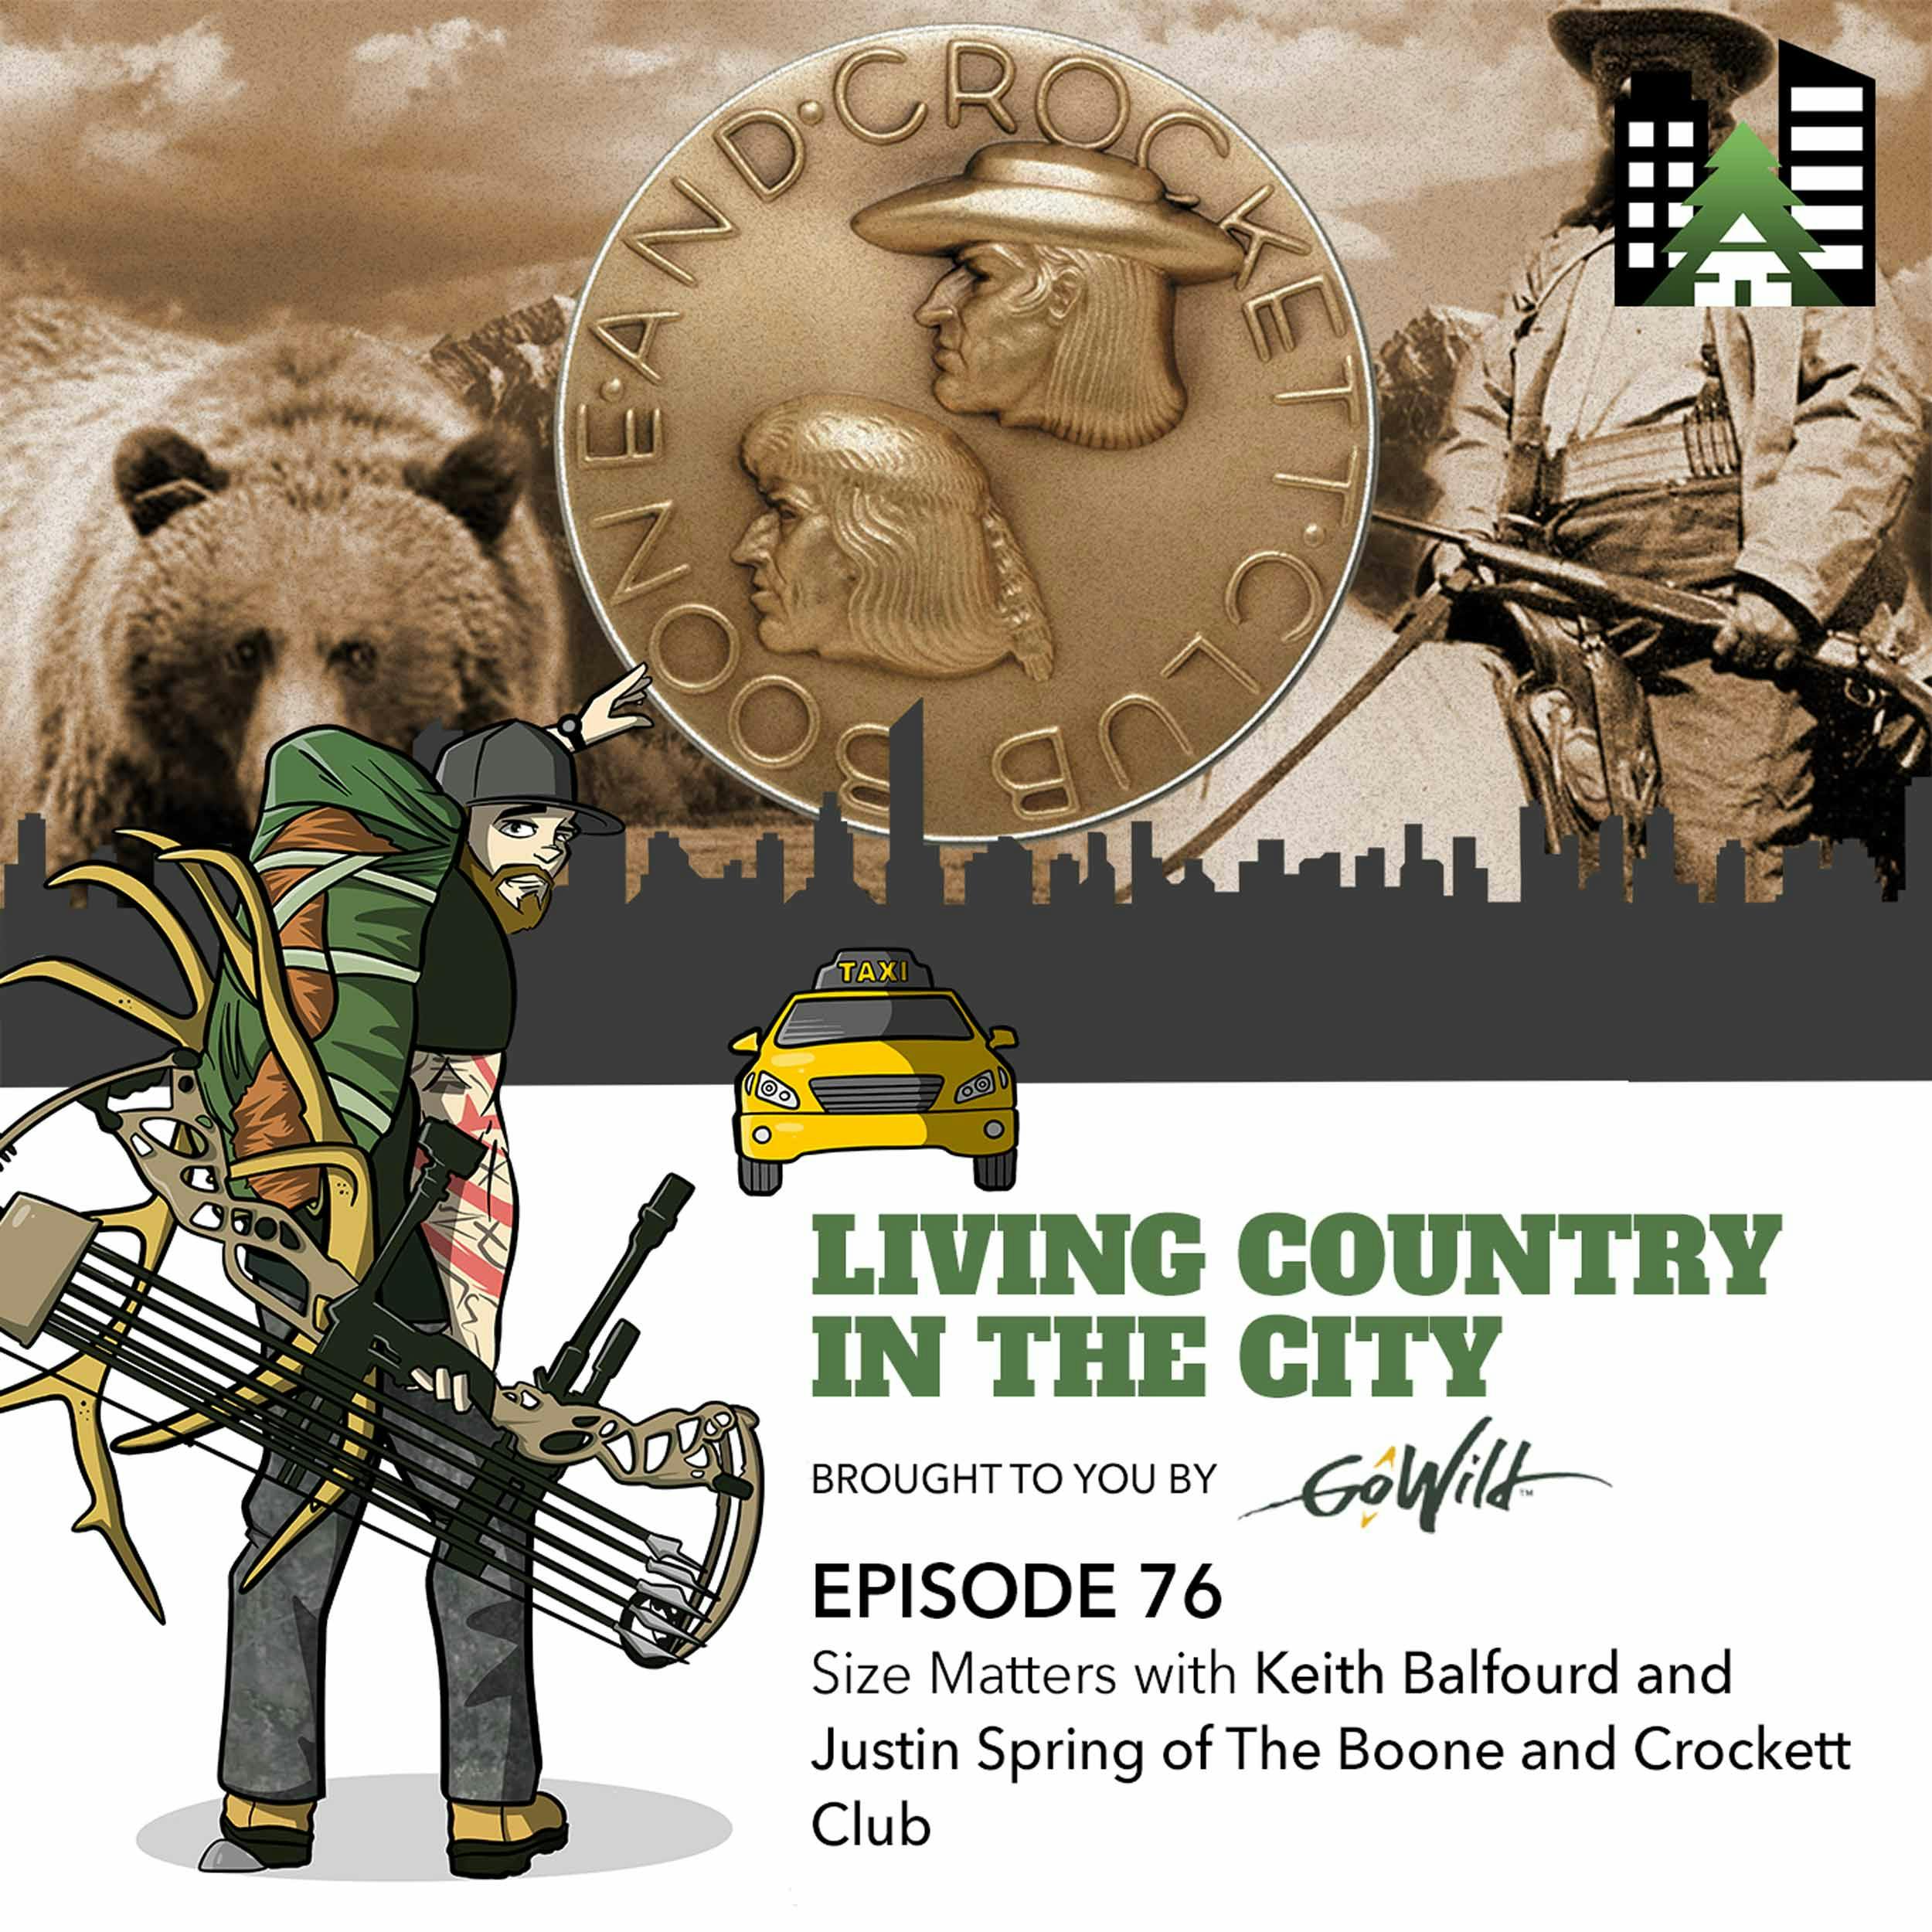 Ep 76 - Size Matters with Keith Balfourd and Justin Spring of The Boone and Crockett Club